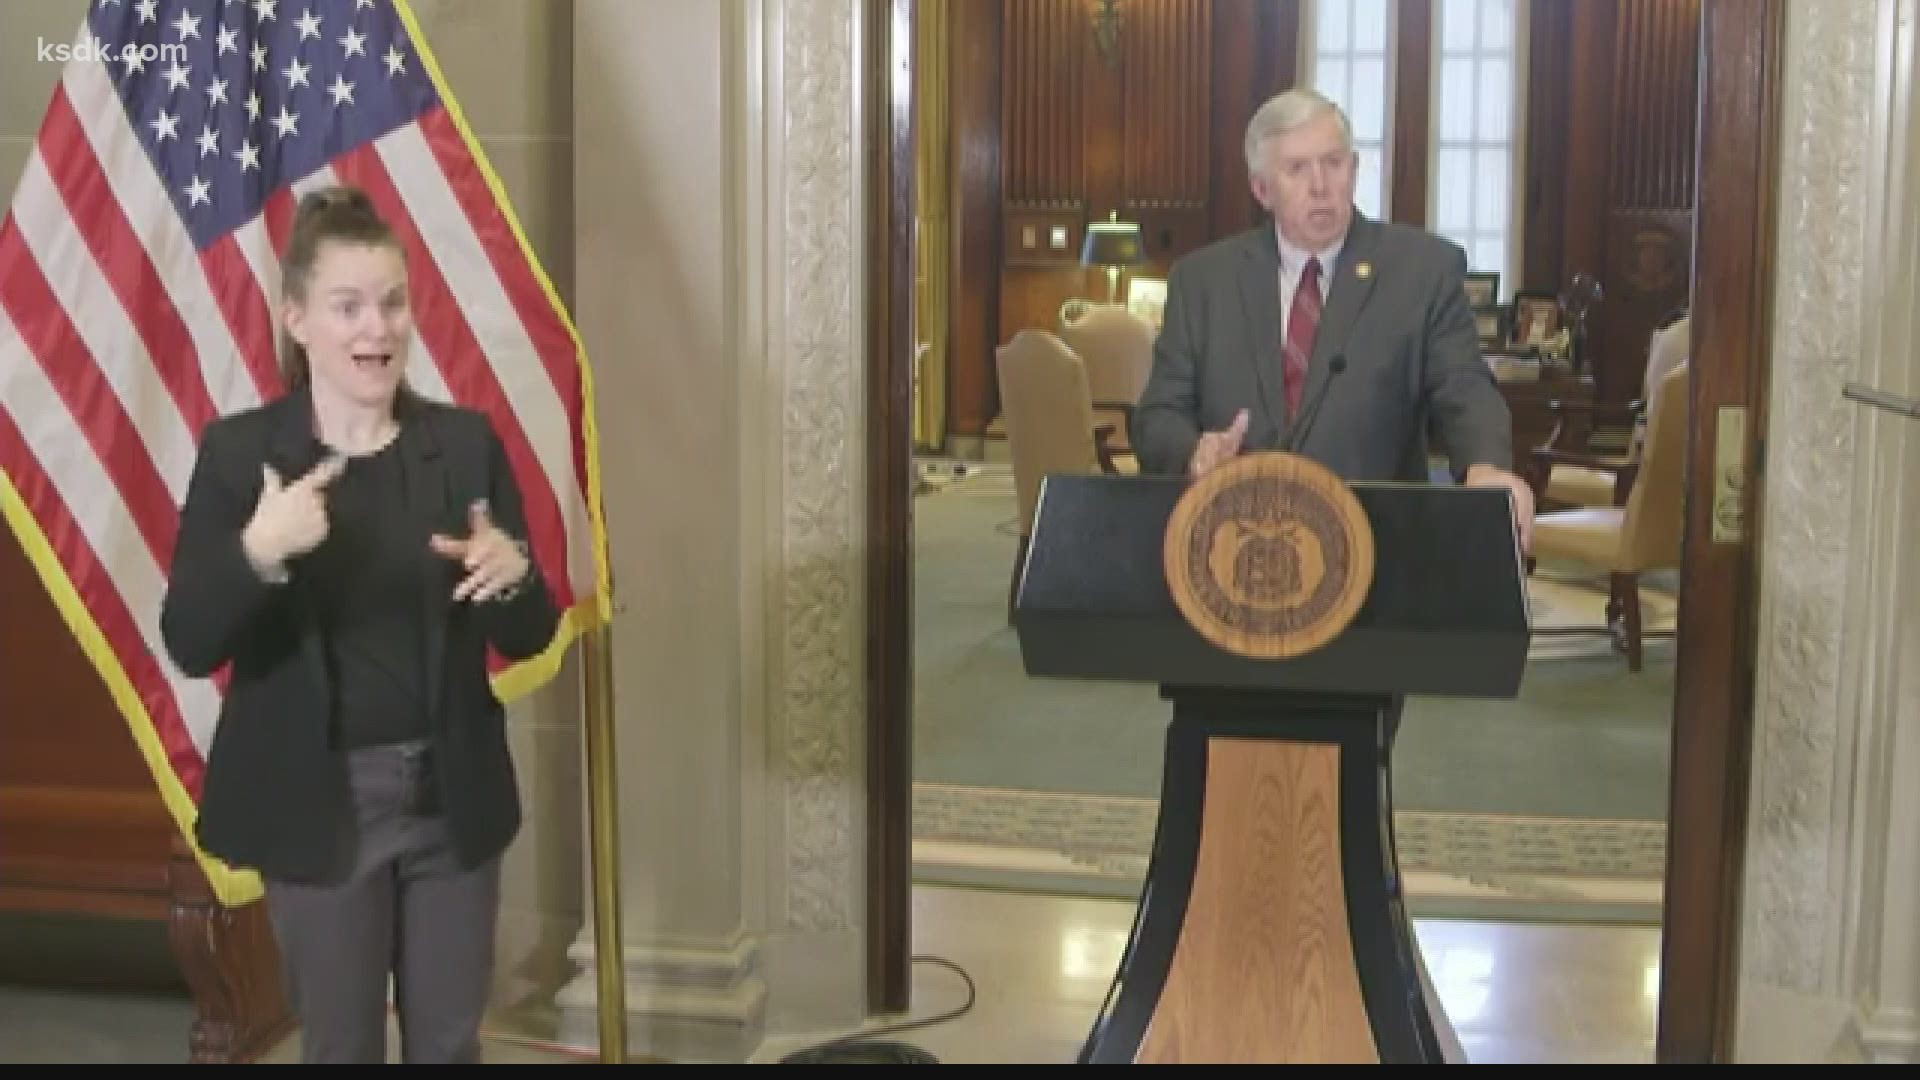 Mike Parson said he does not blame Donald Trump for the actions at the Capitol Wednesday.